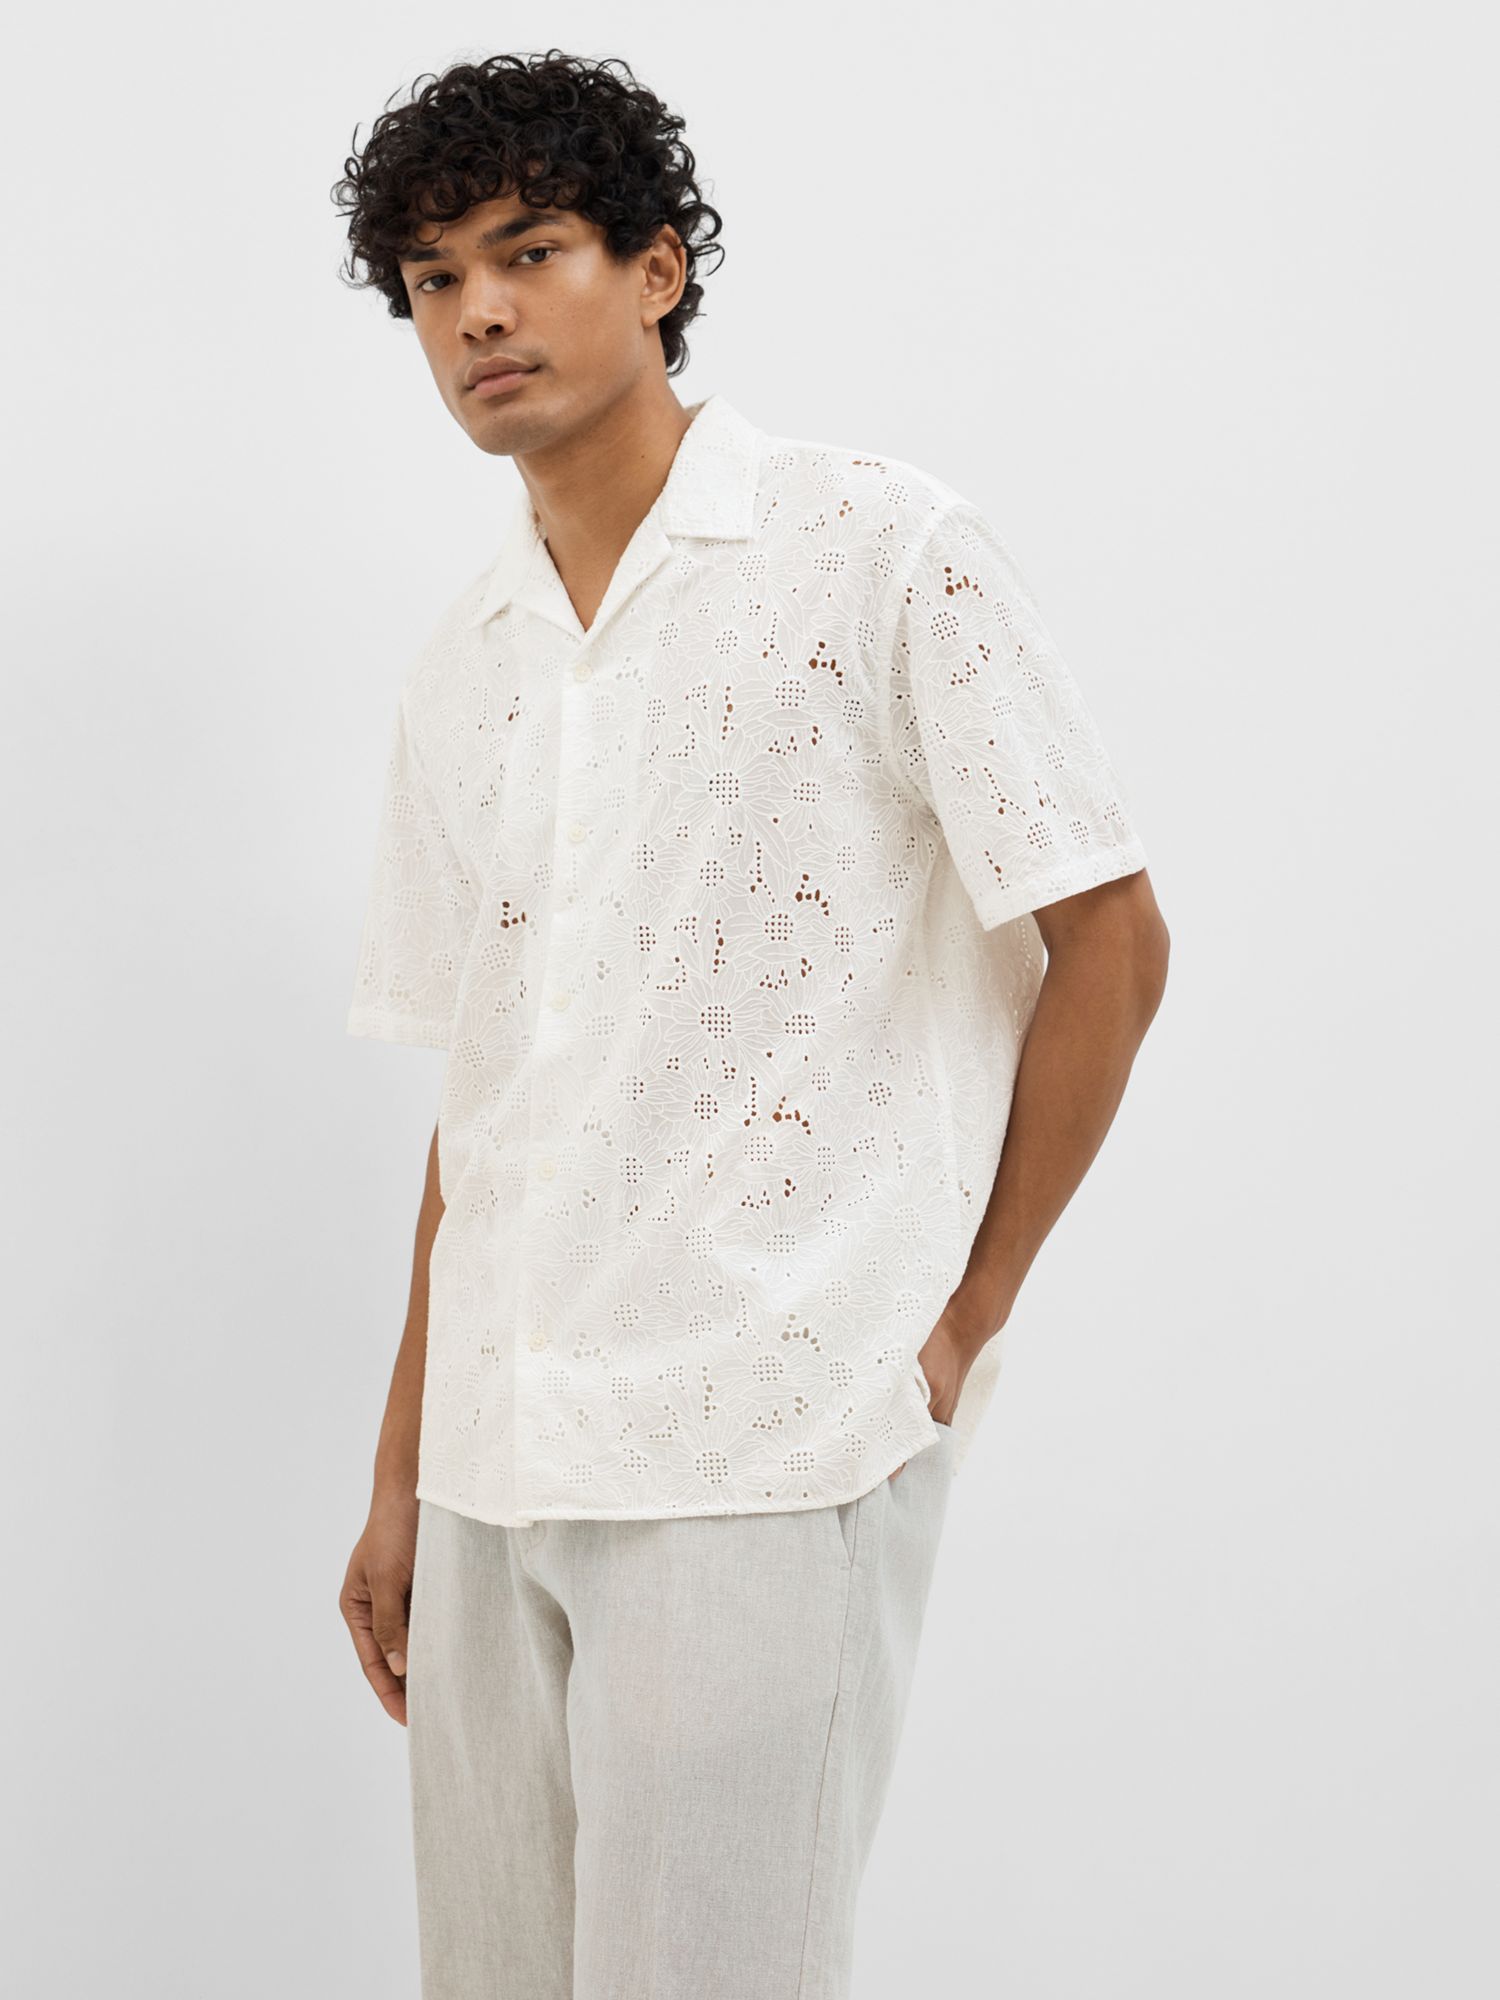 SELECTED HOMME Jax Broderie Shirt, Bright White, S